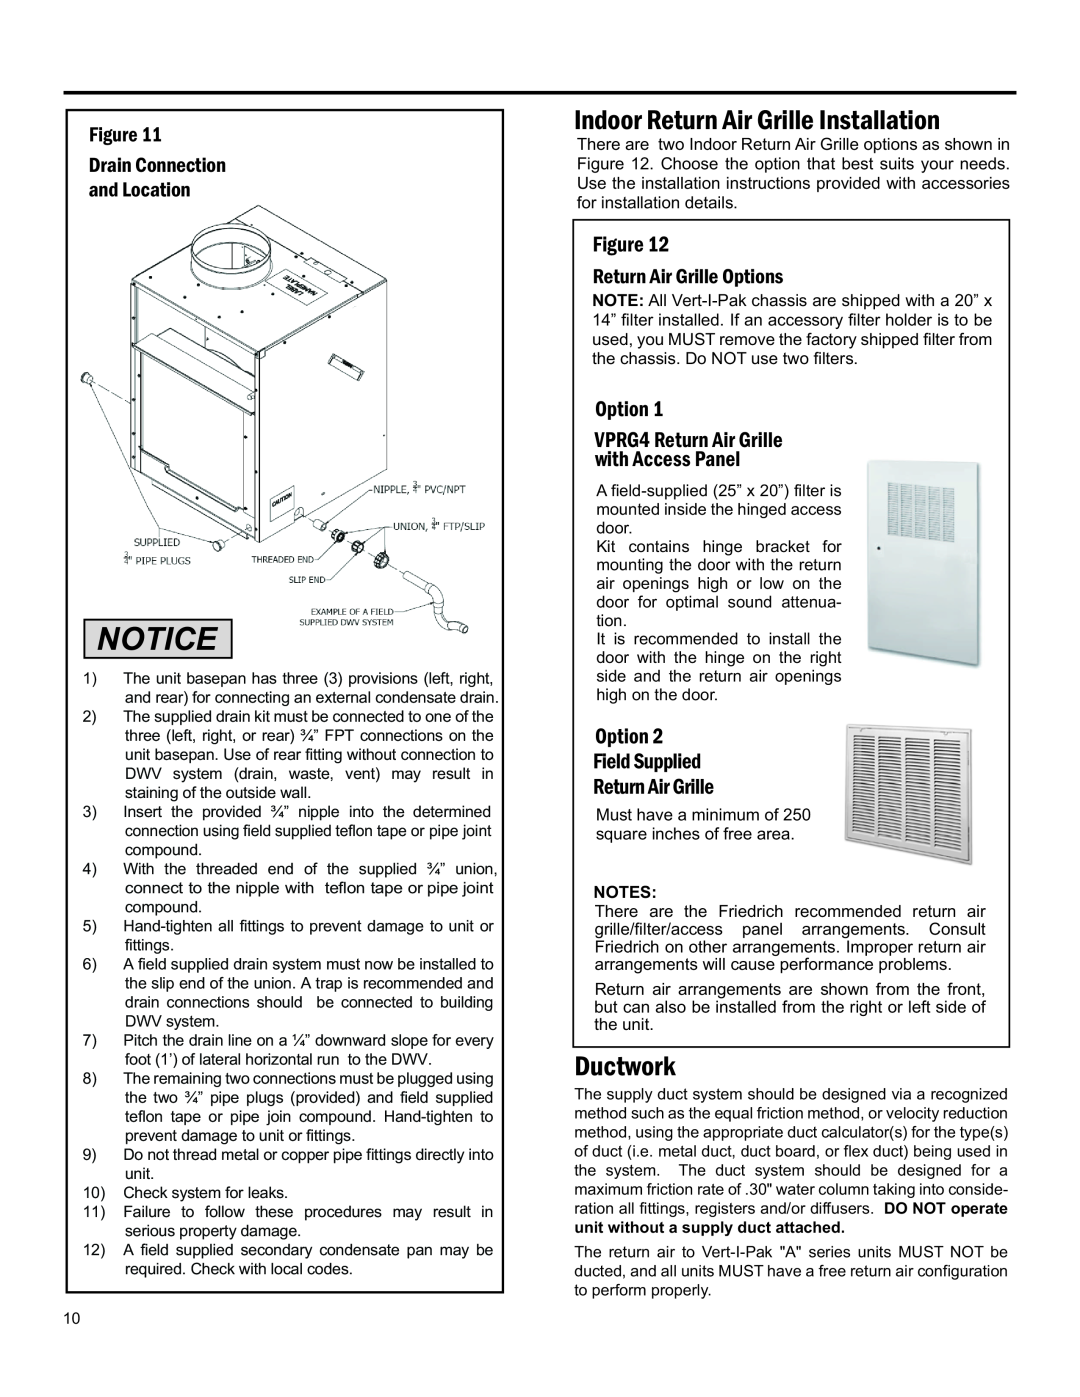 Friedrich 920-075-13 (1-11) operation manual Notice, Indoor Return Air Grille Installation, Ductwork, Notes 